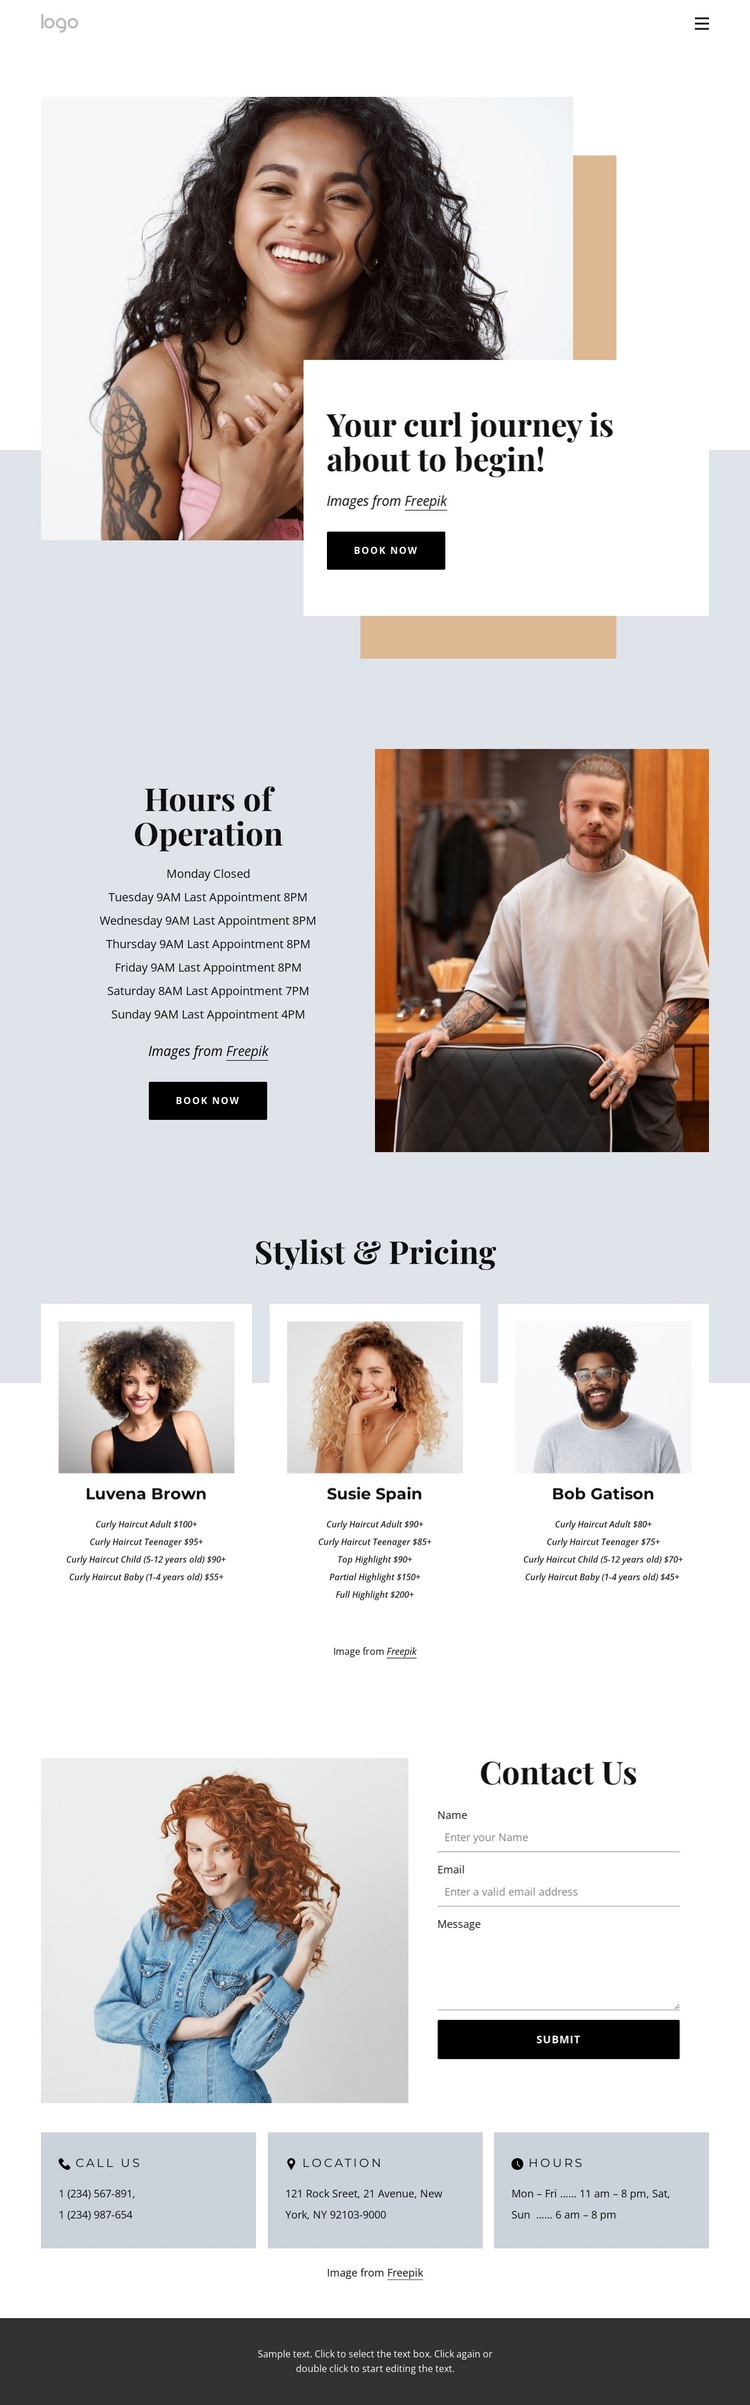 Your curl journey HTML5 Template